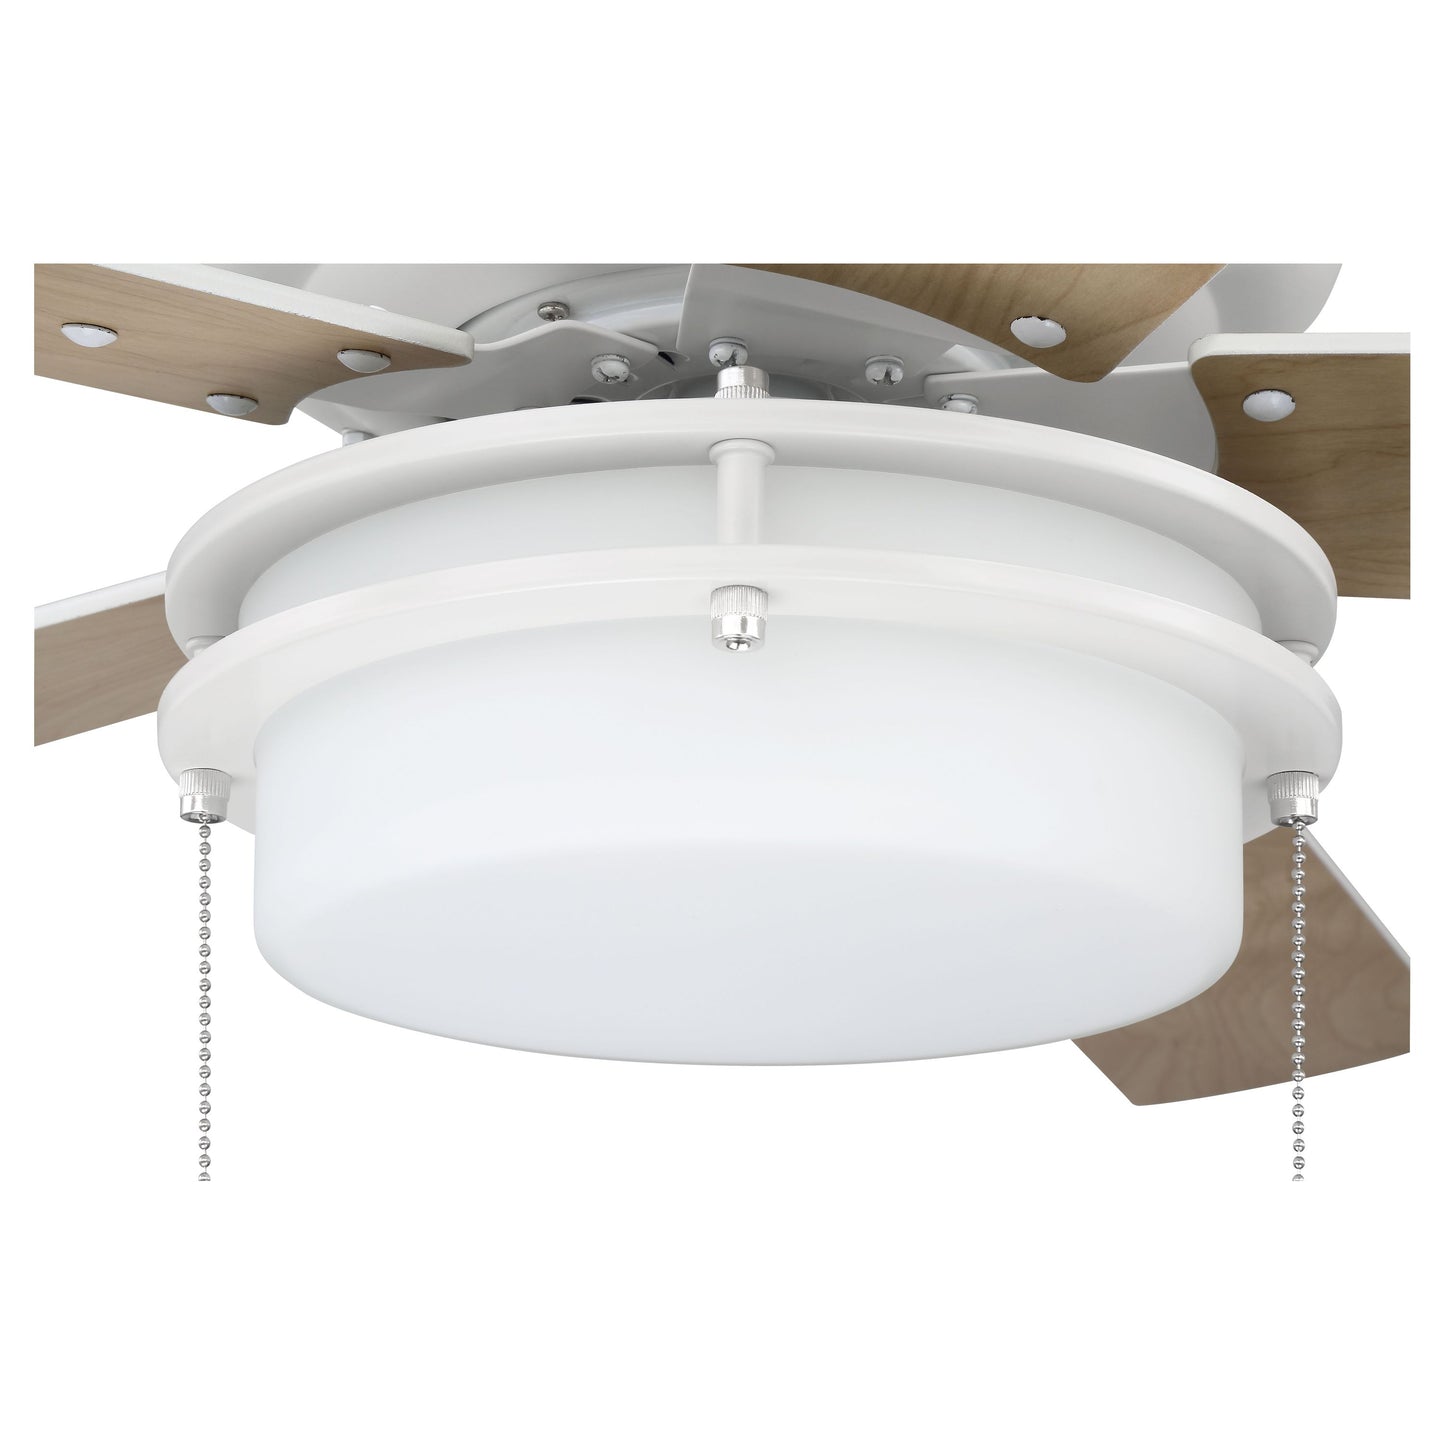 STO52W5 - Stonegate 52" 5 Blade Ceiling Fan with Light Kit - Pull Chain - White